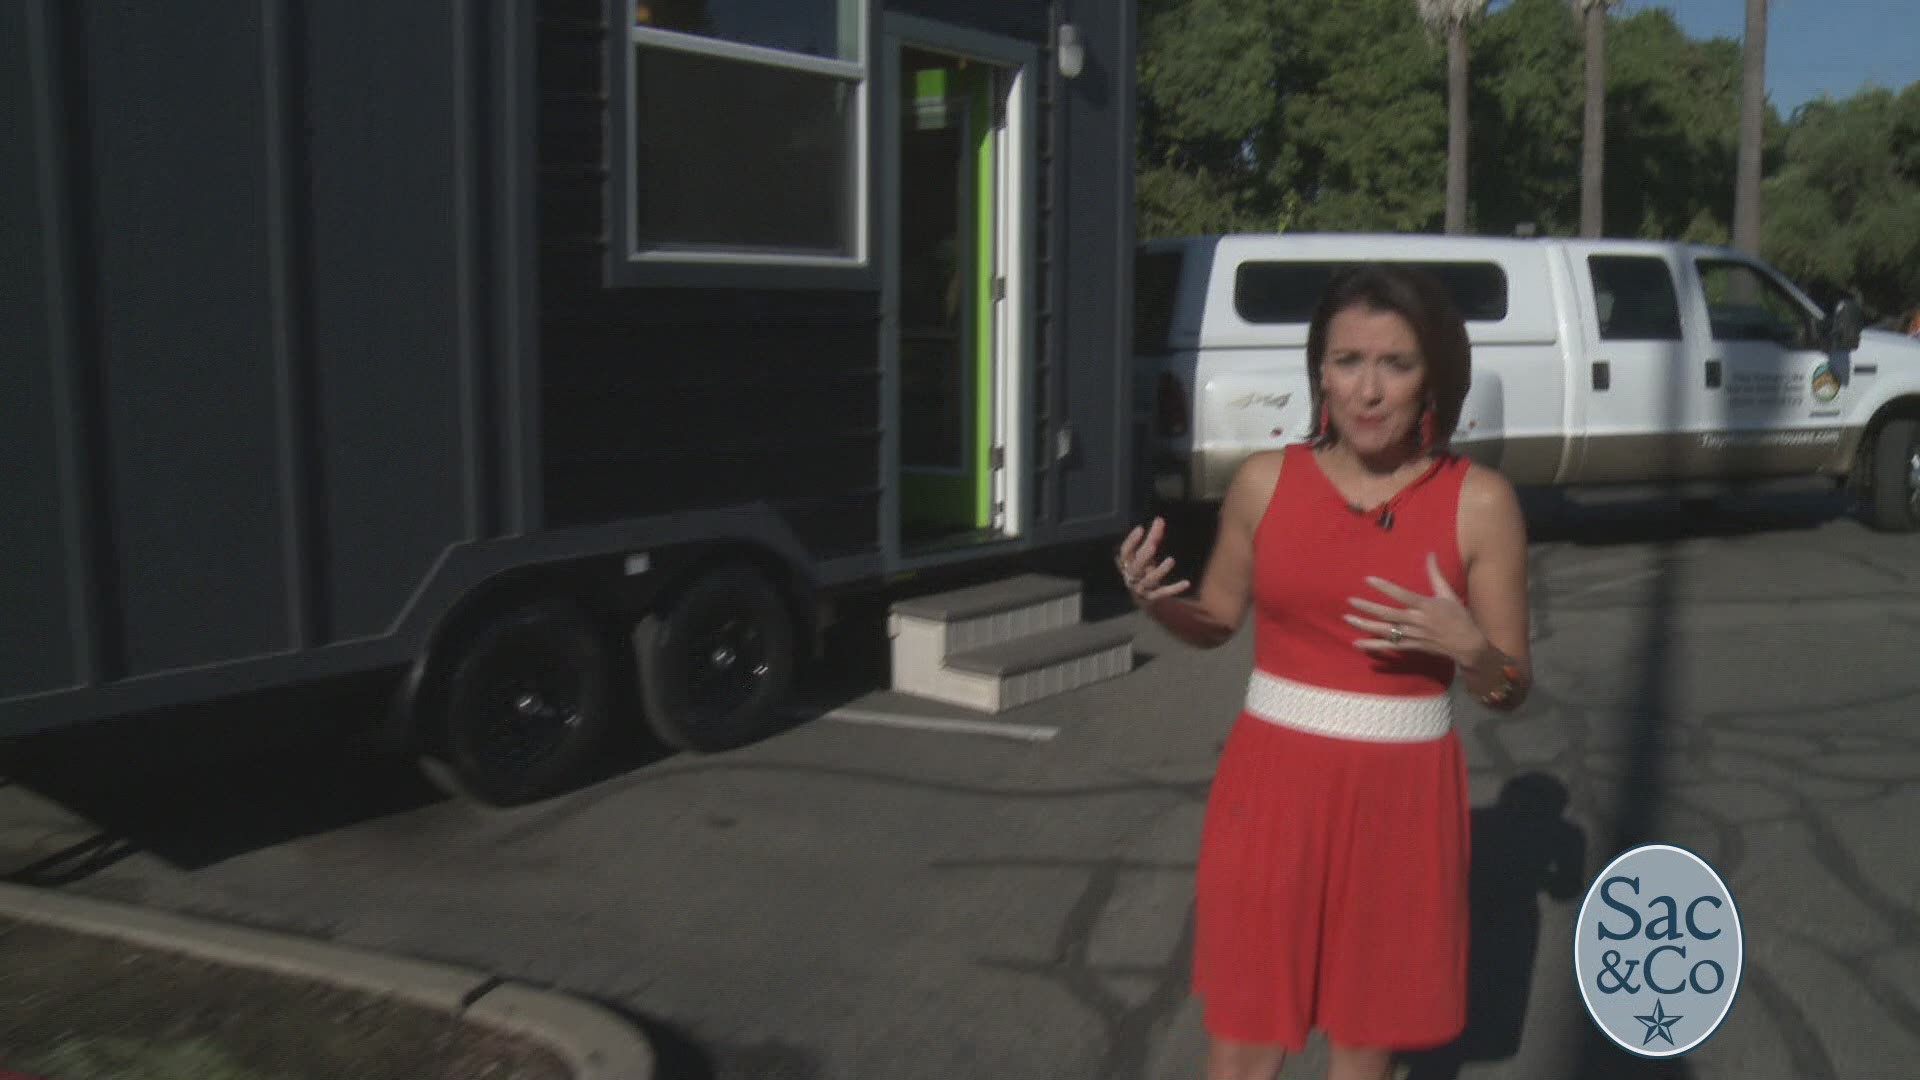 Win a tiny house by entering their raffle at the Auburn Fall Home Show. Mellisa Paul checks out all of the interior and exterior details with Owner, Lou Pereyra.